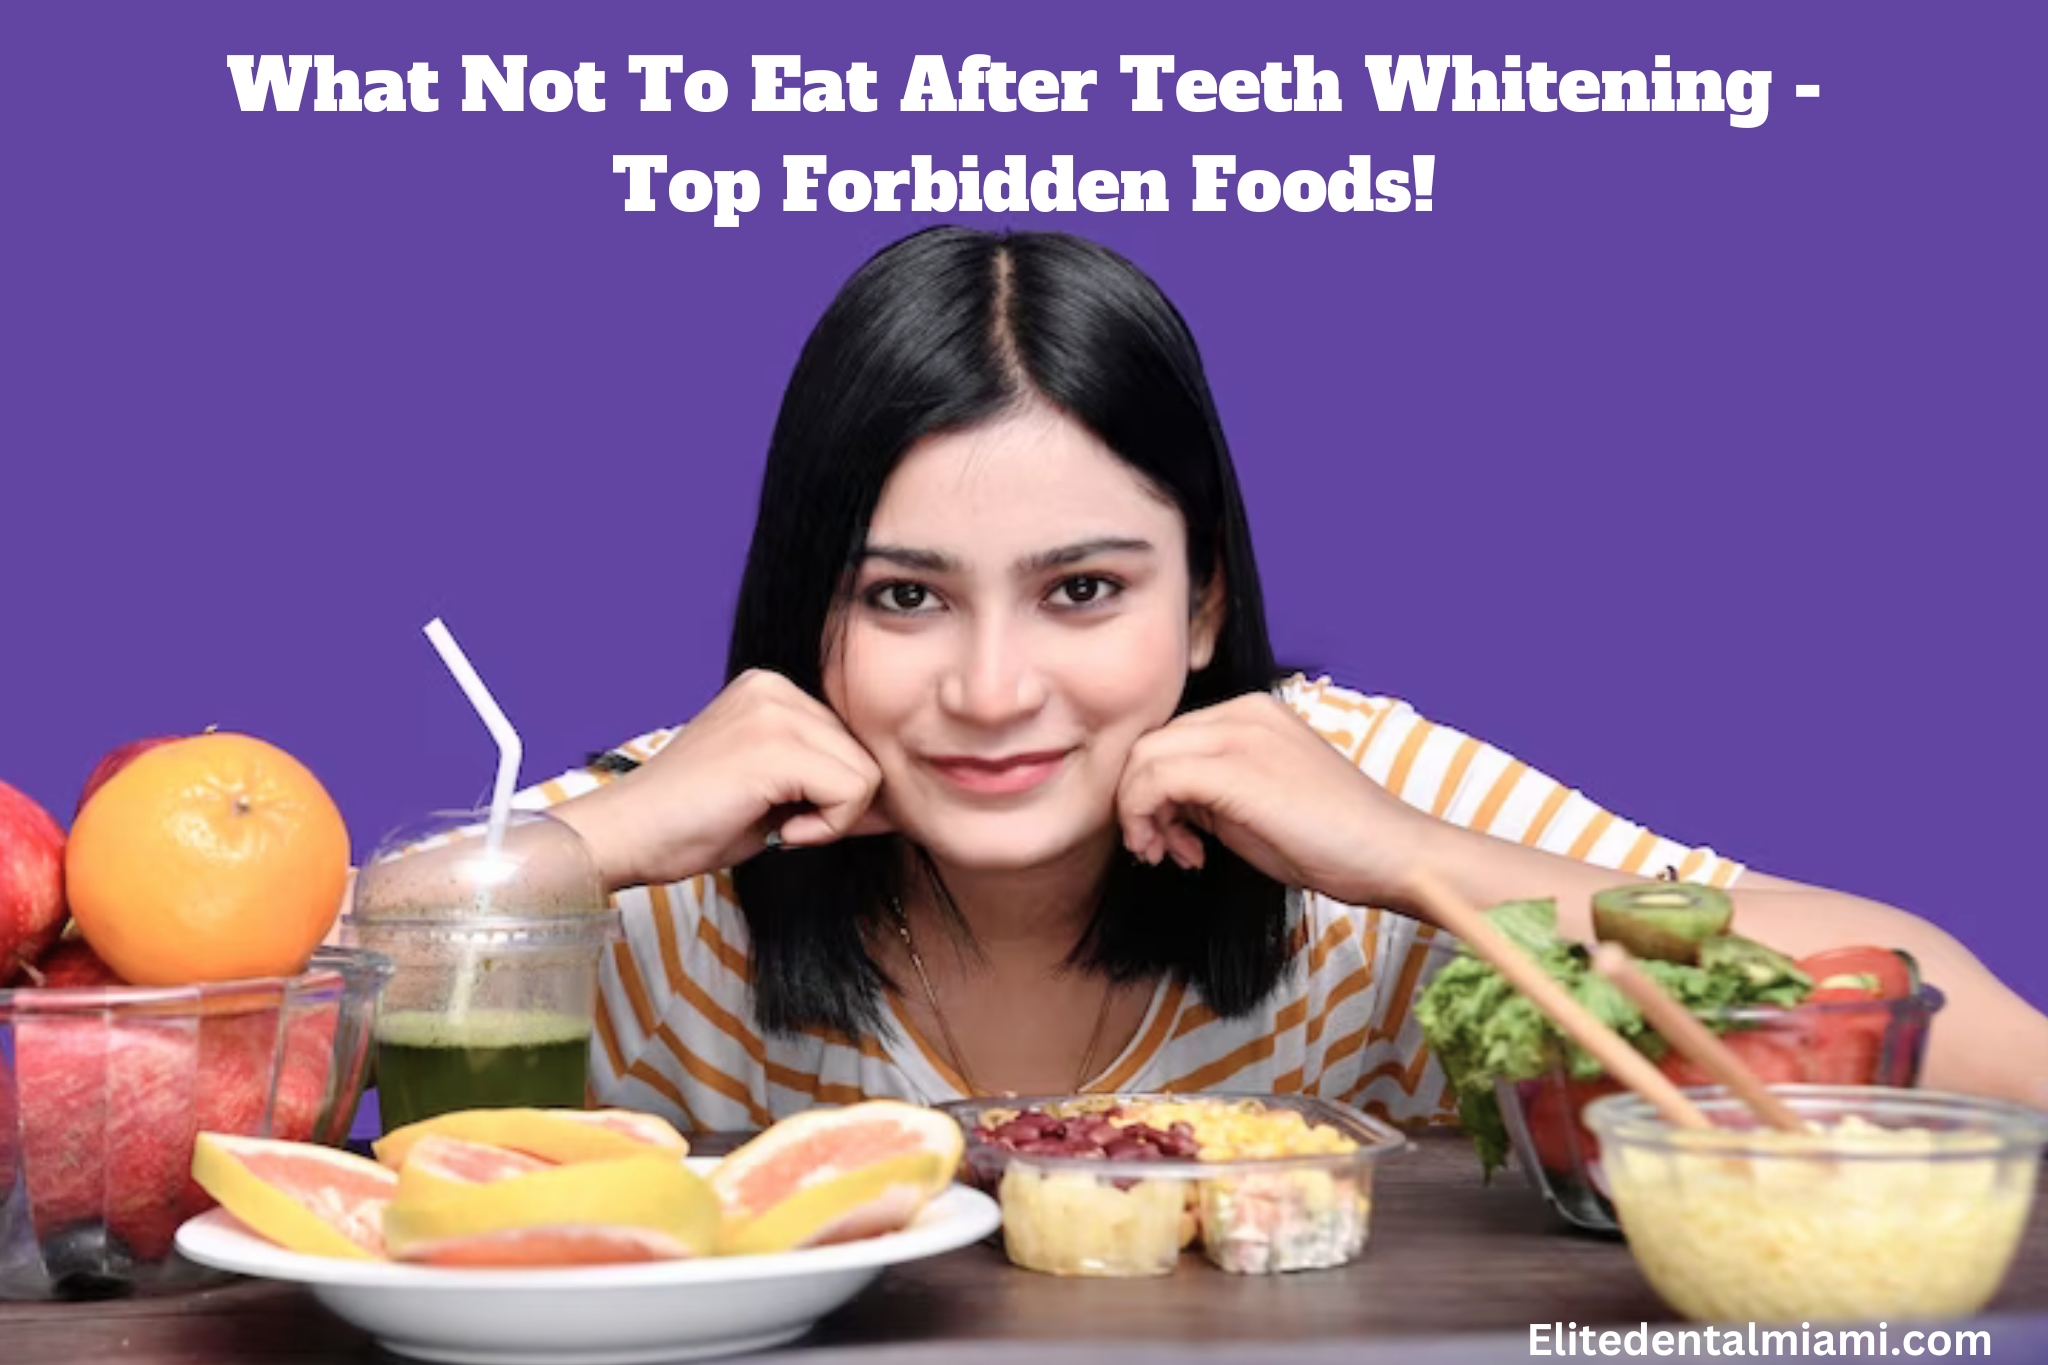 What Not To Eat After Teeth Whitening